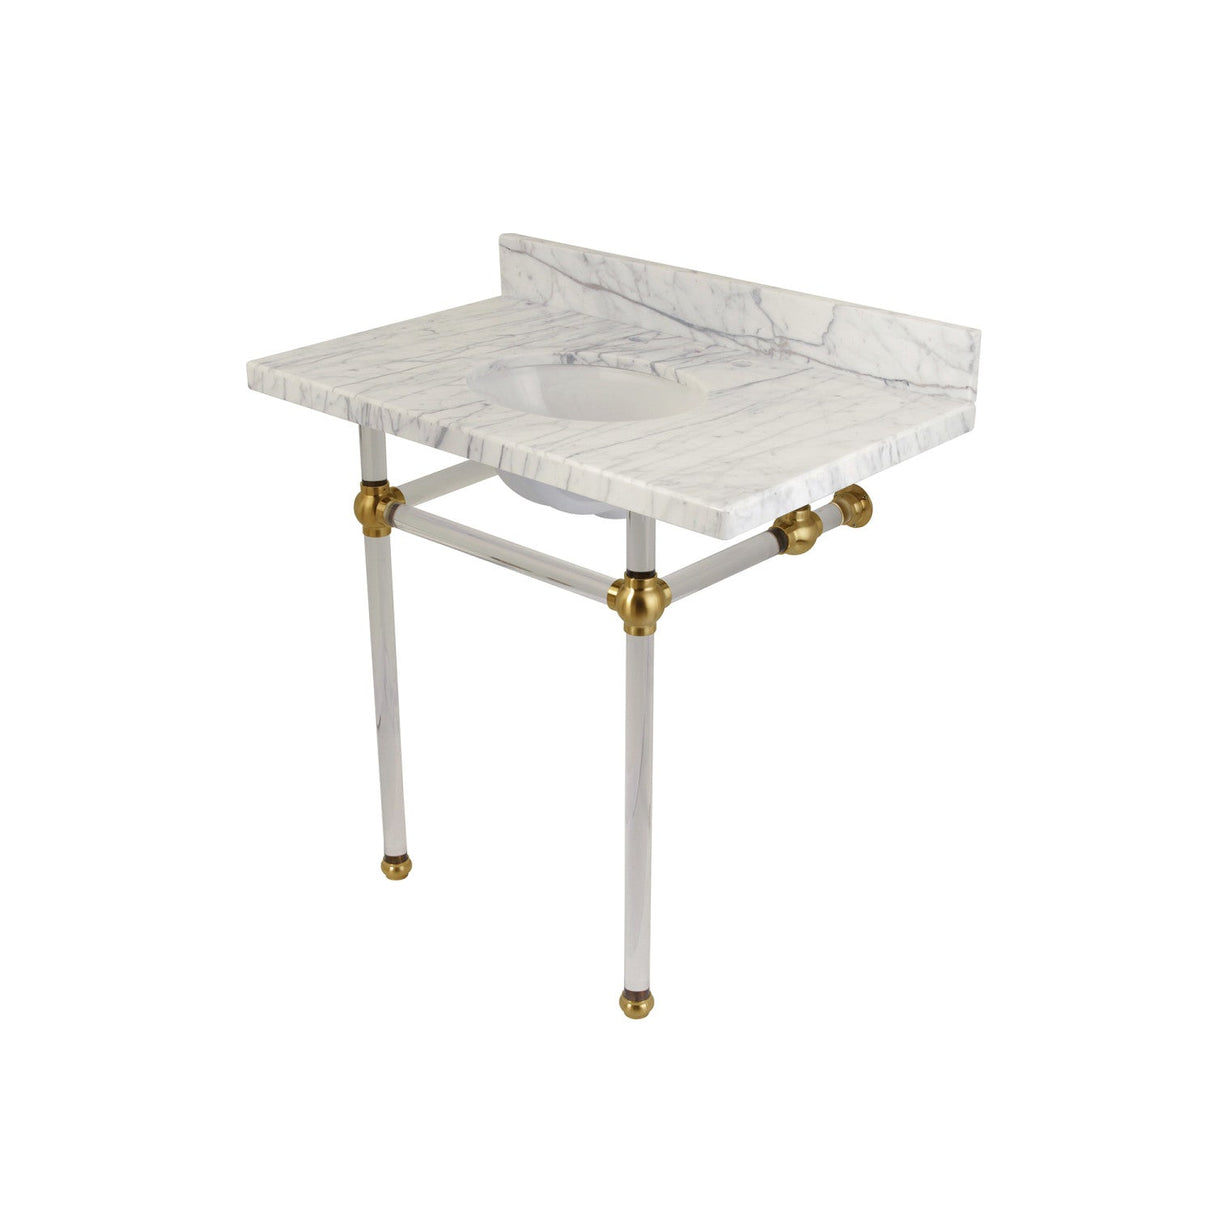 Fauceture KVPB36MA7 36-Inch Marble Console Sink with Acrylic Feet, Carrara Marble/Brushed Brass